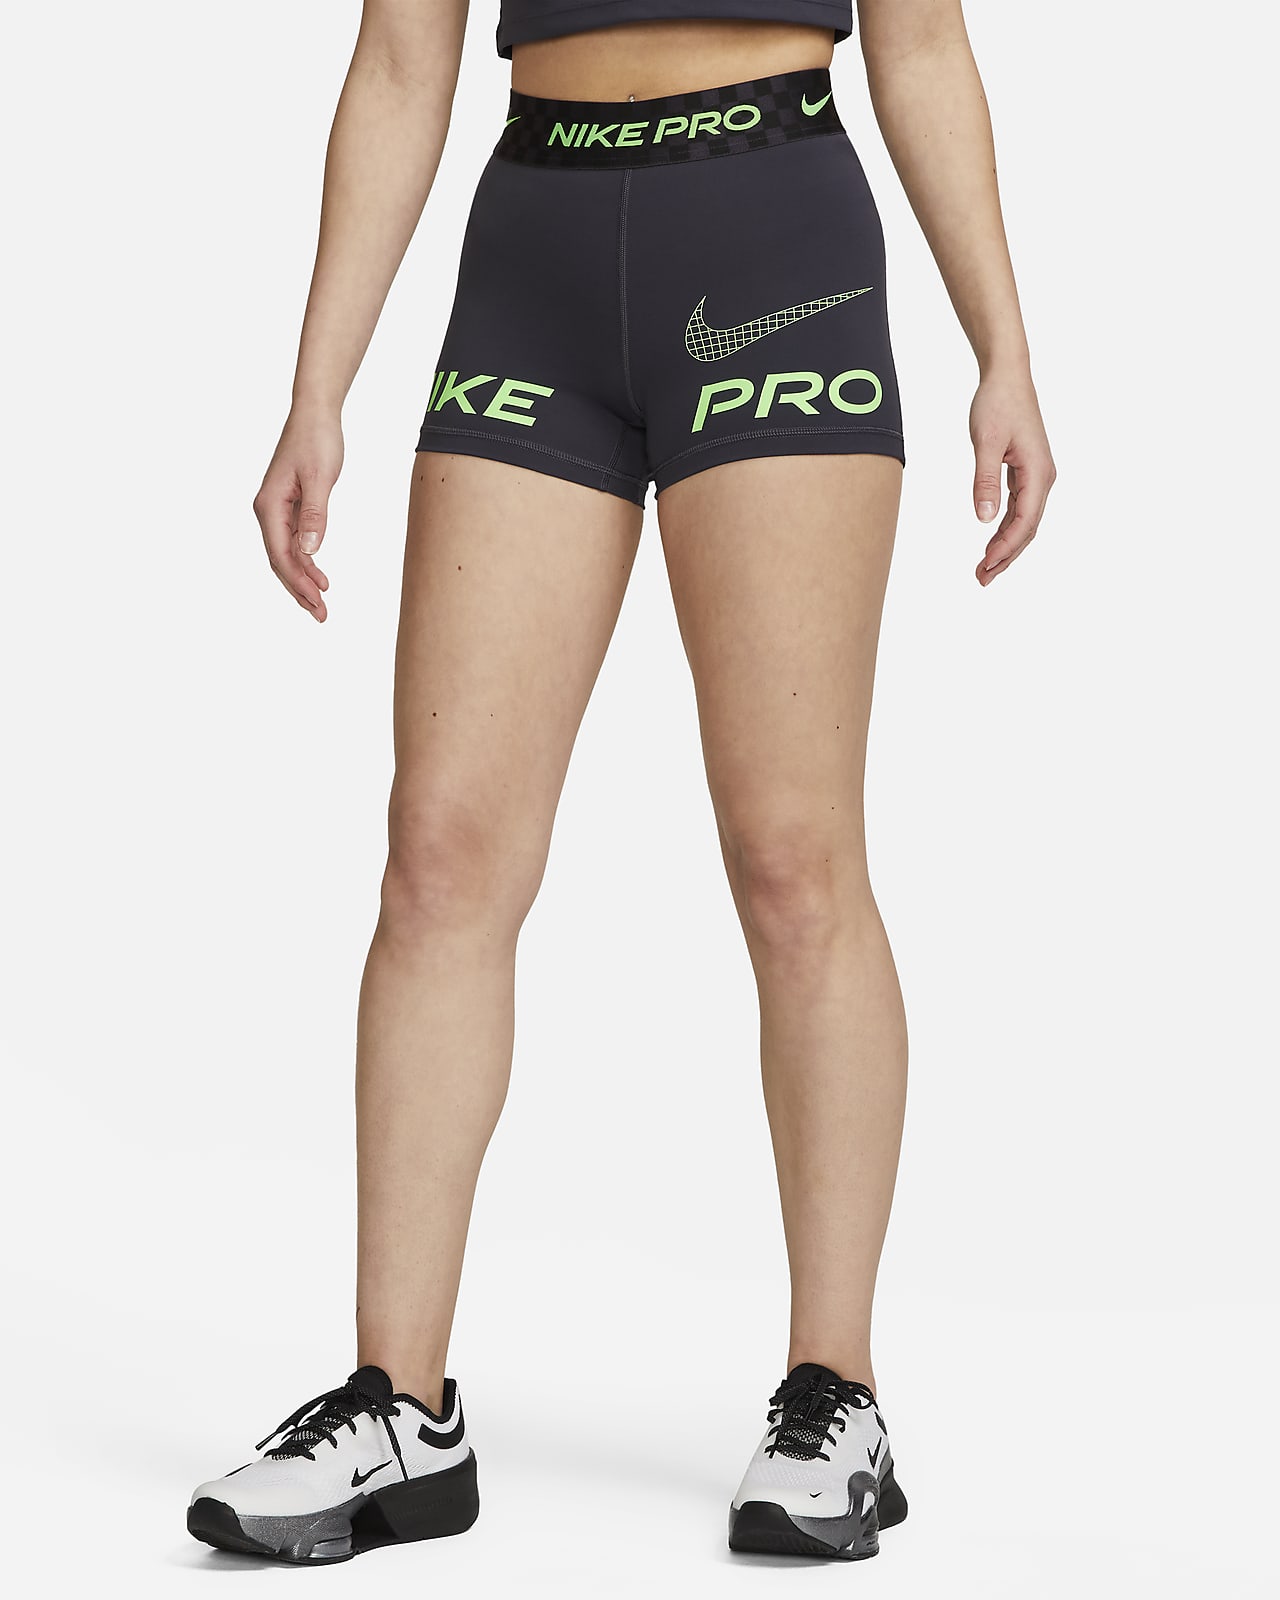 straf Aanval Huh Nike Pro Dri-FIT Women's Mid-Rise 8cm (approx.) Graphic Training Shorts.  Nike LU